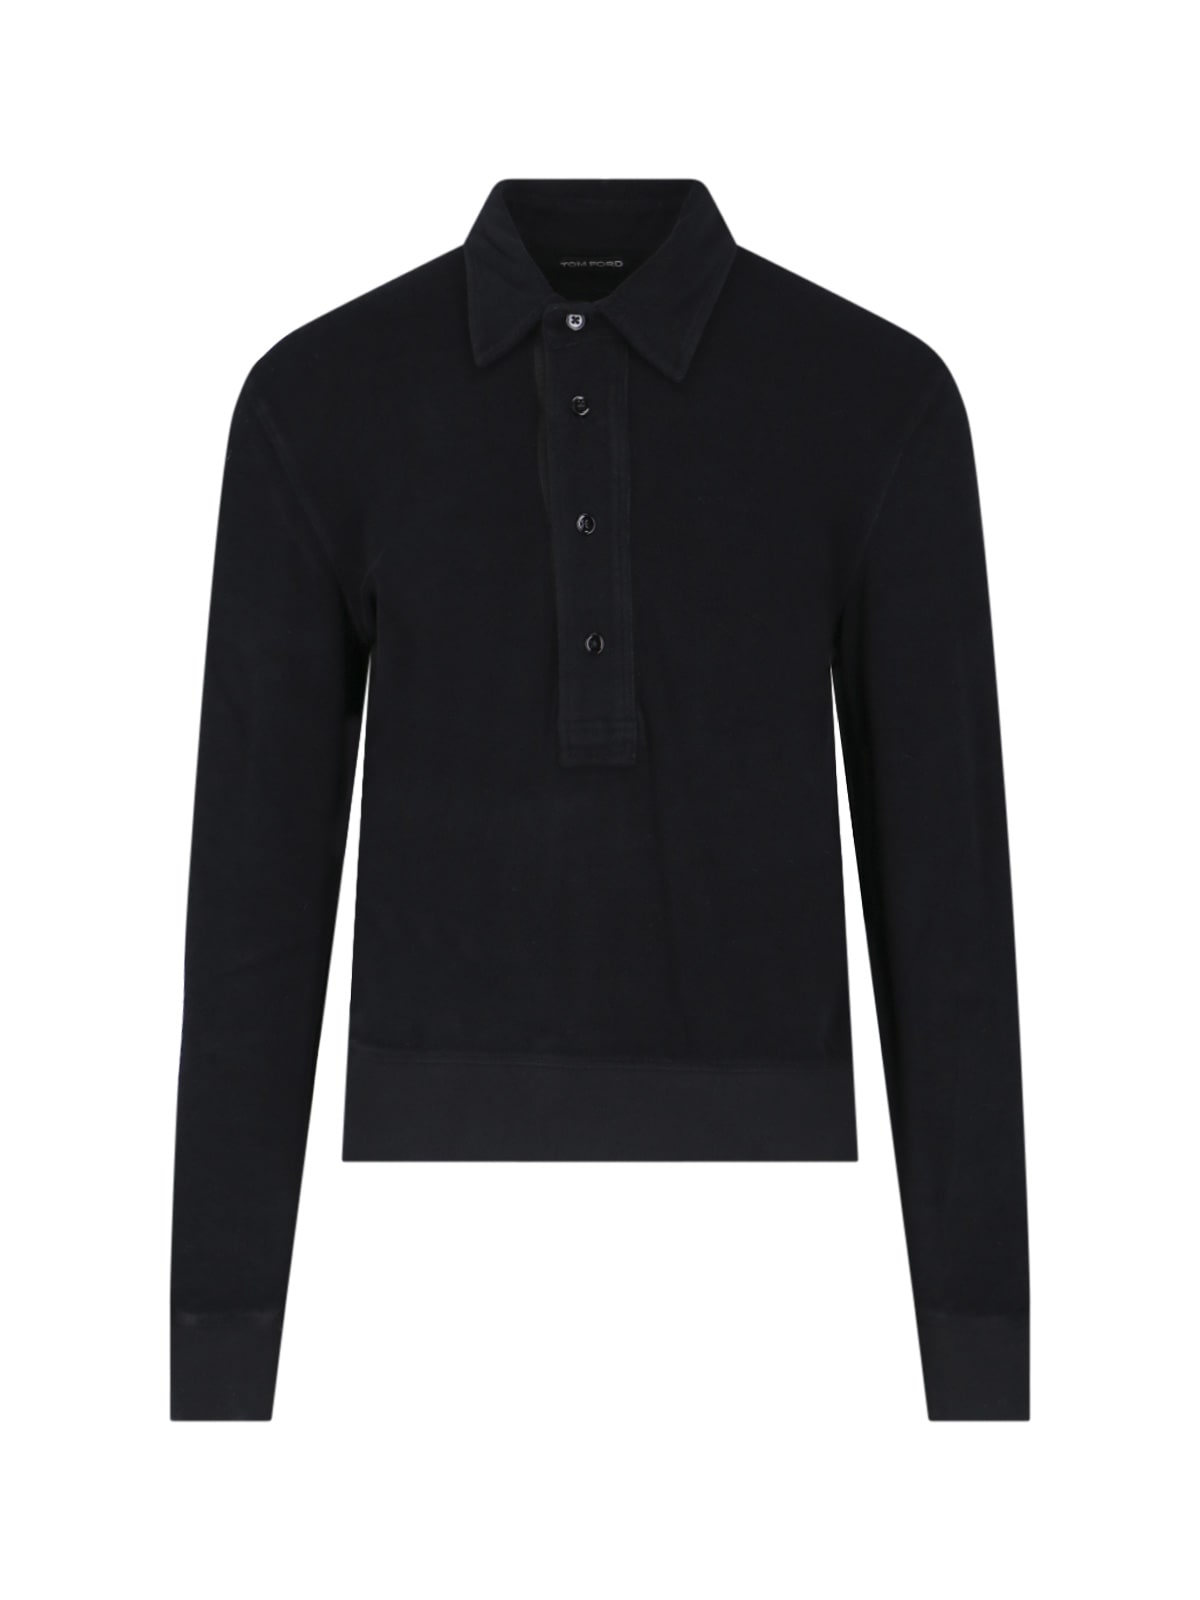 TOM FORD POLO SWEATER